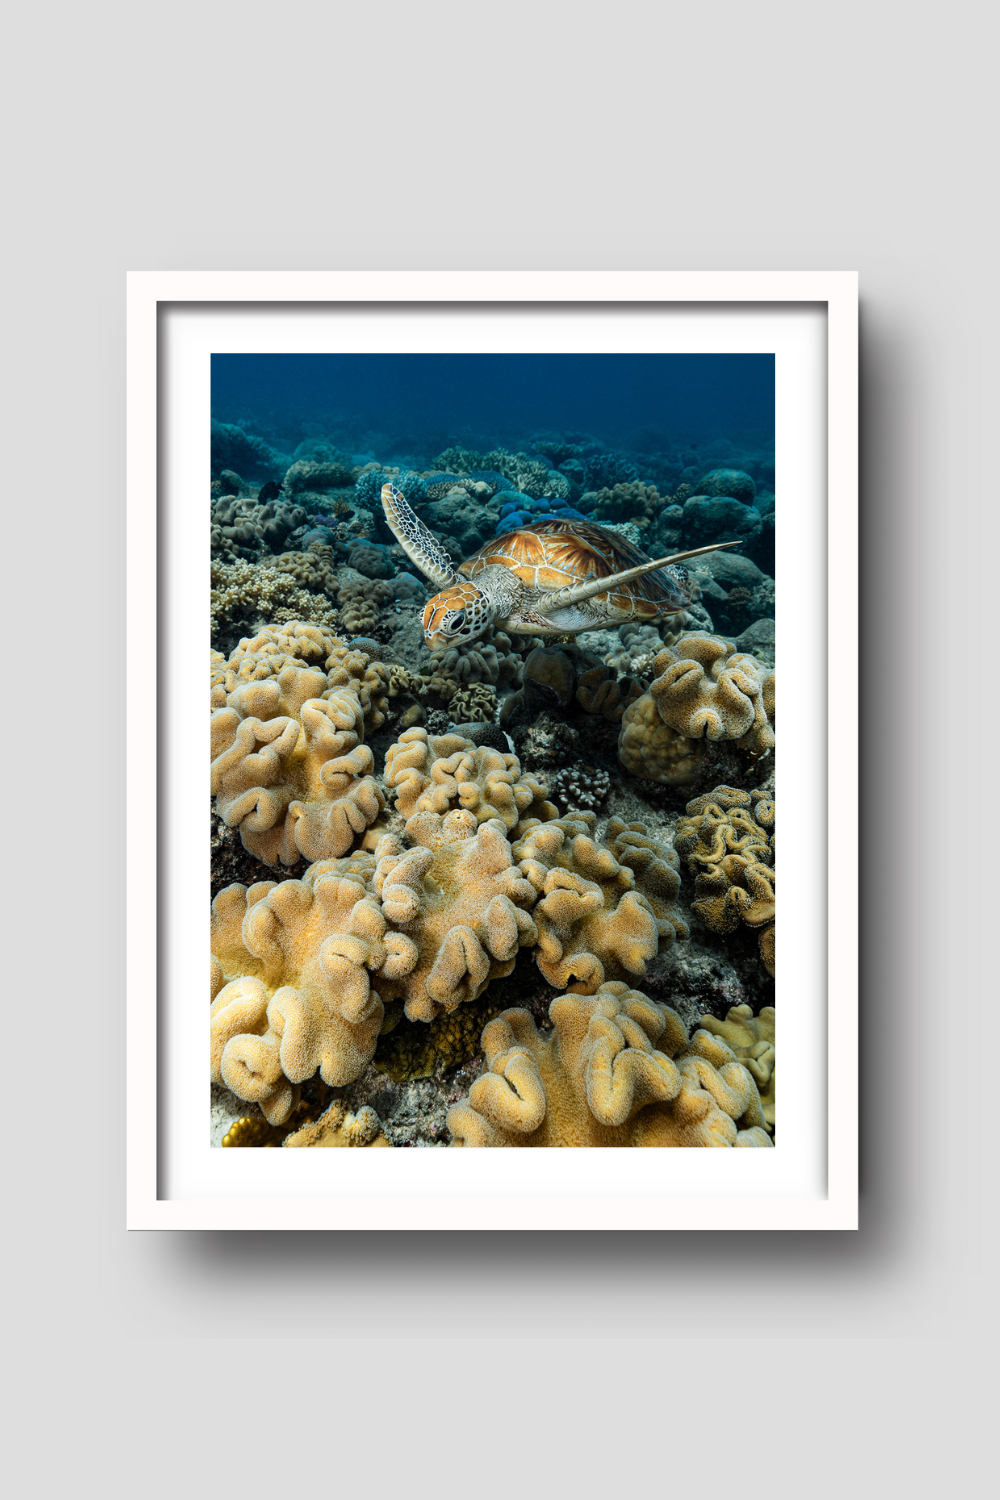 below the water with yellow and blue reef underneath a turtle swimming towards the camera